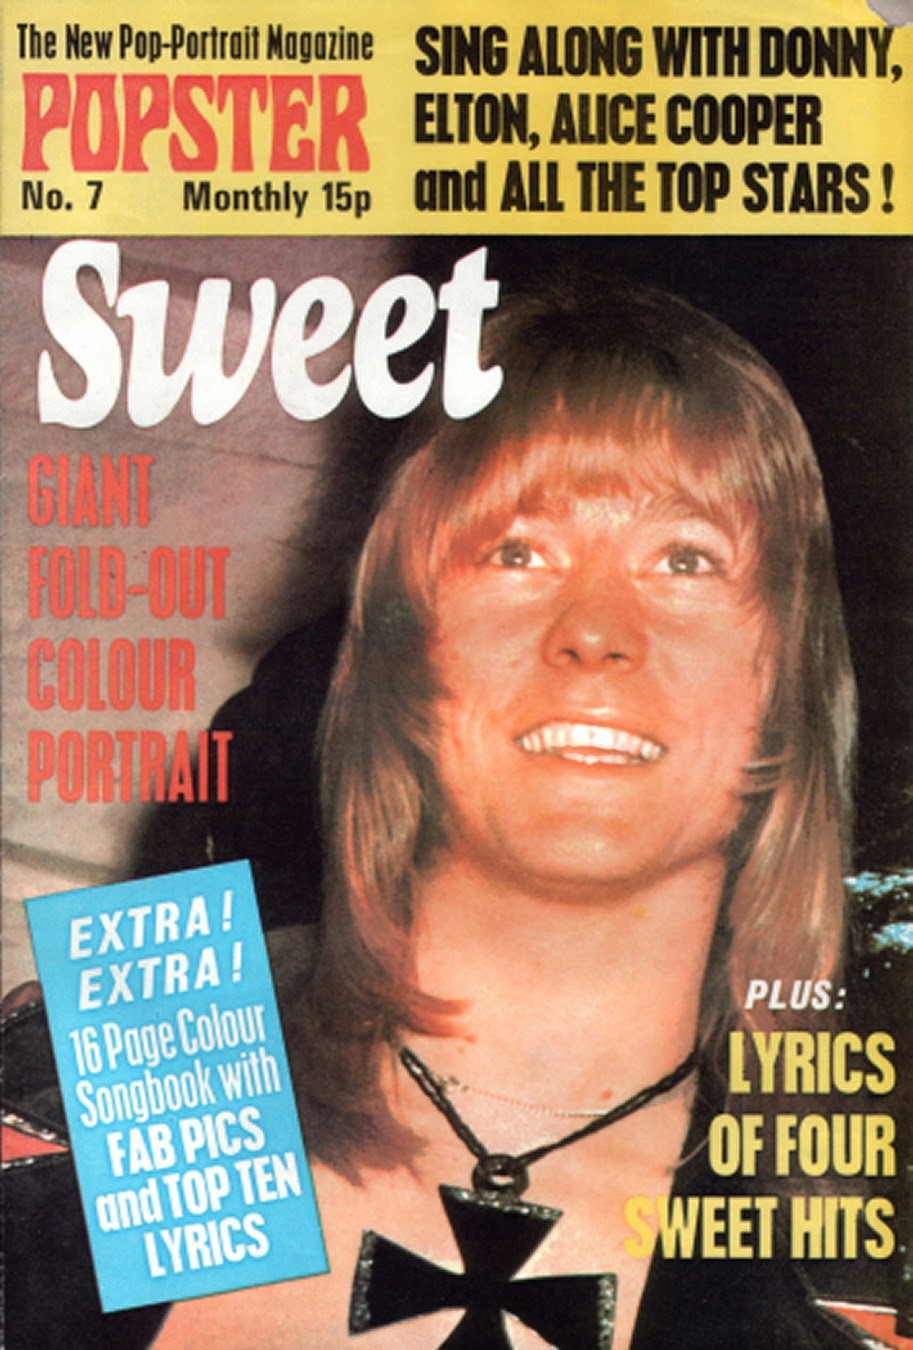 MUSIC MAGS 1970s - 1980s: POPSTER POSTER MAGAZINE 1972 To 1975